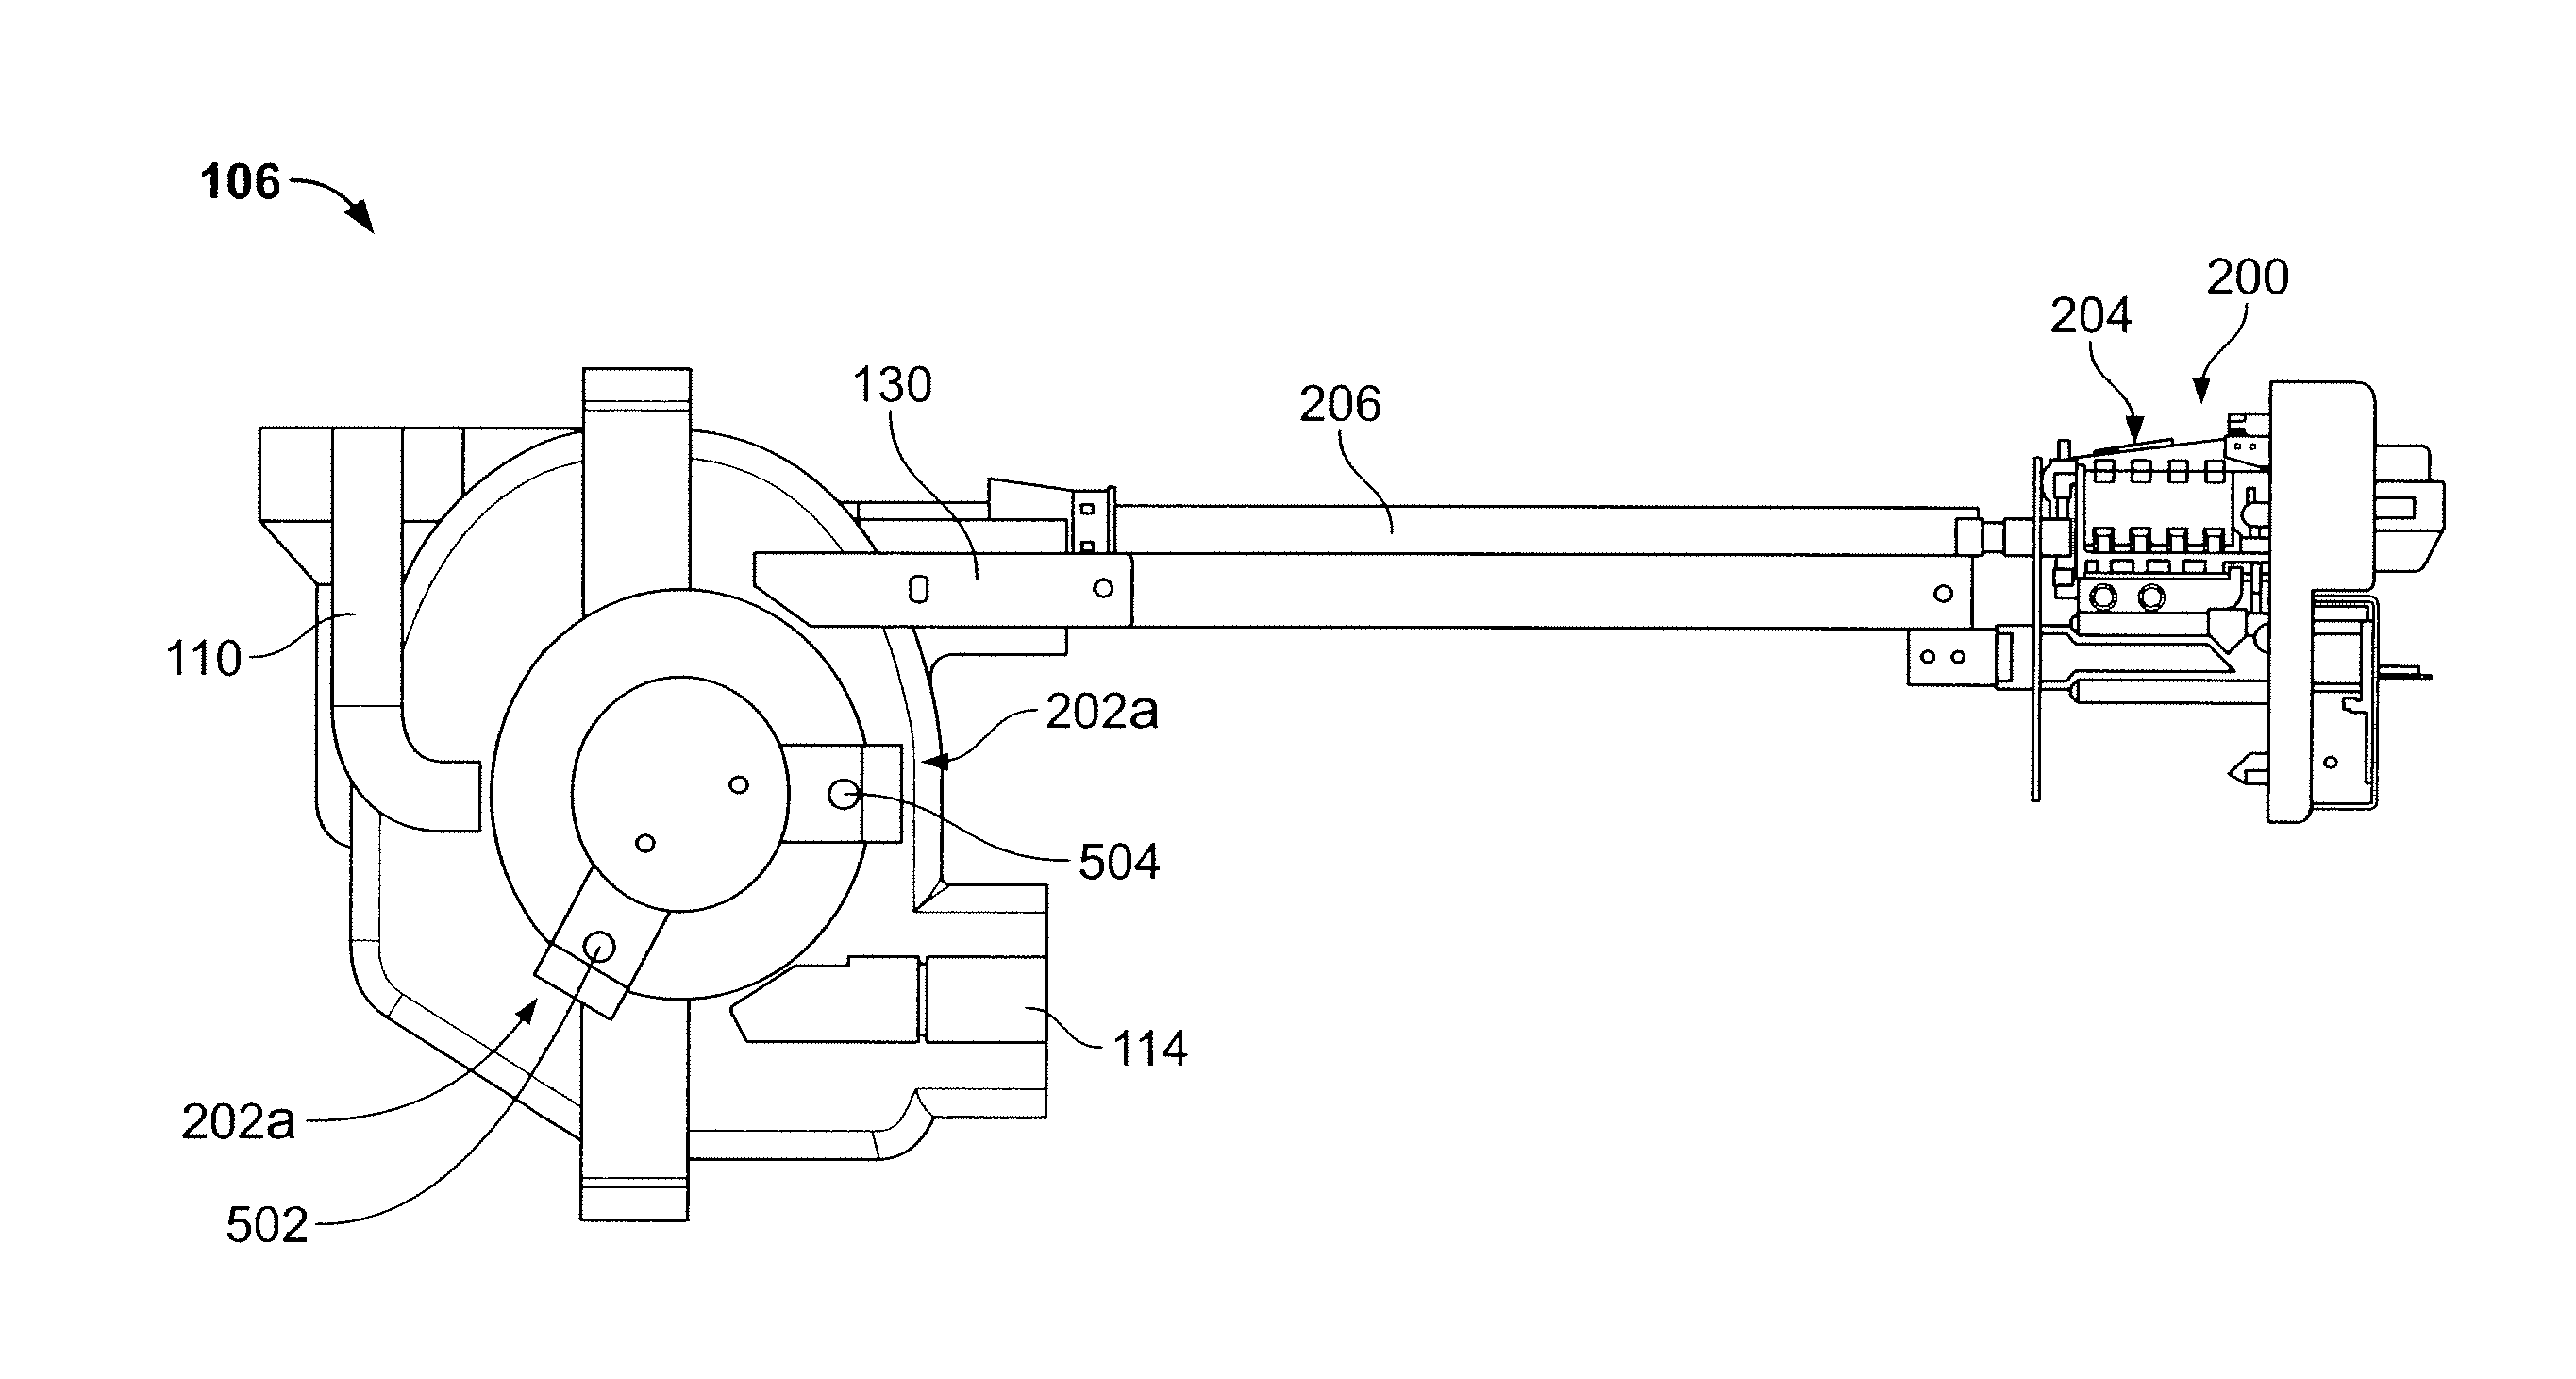 Remote drive for disconnector/isolator used in switchgear